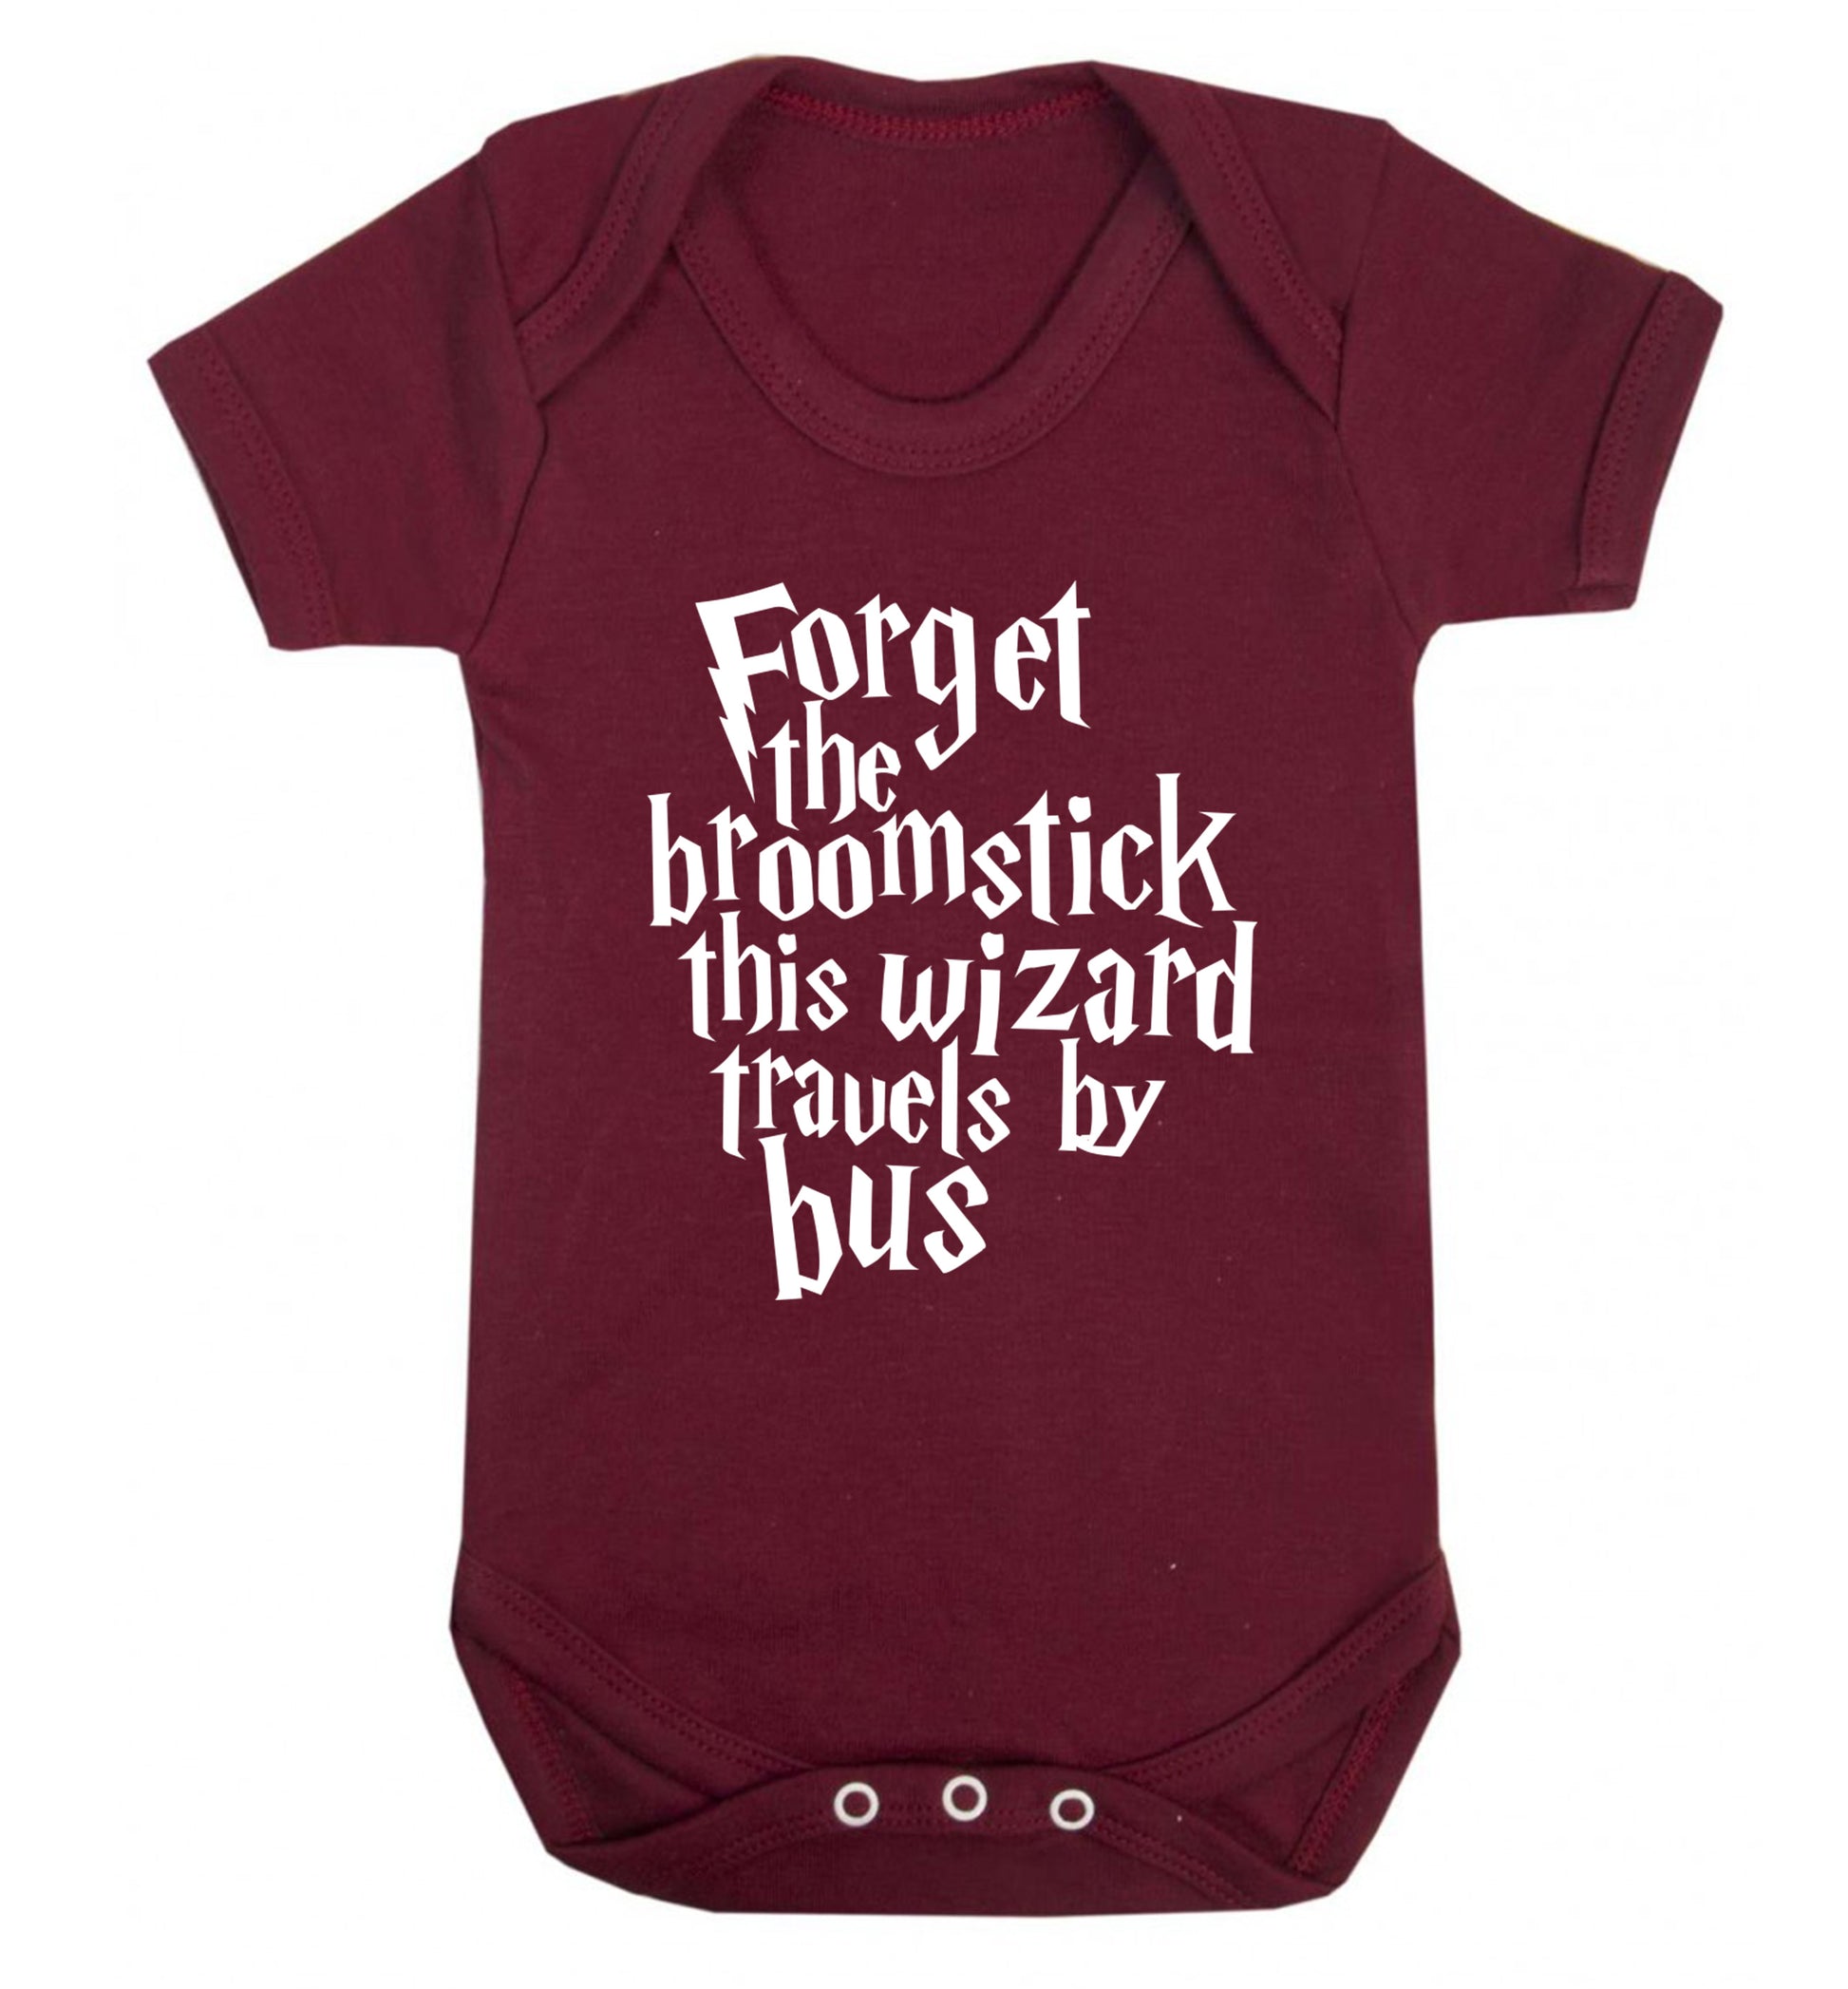 Forget the broomstick this wizard travels by bus Baby Vest maroon 18-24 months